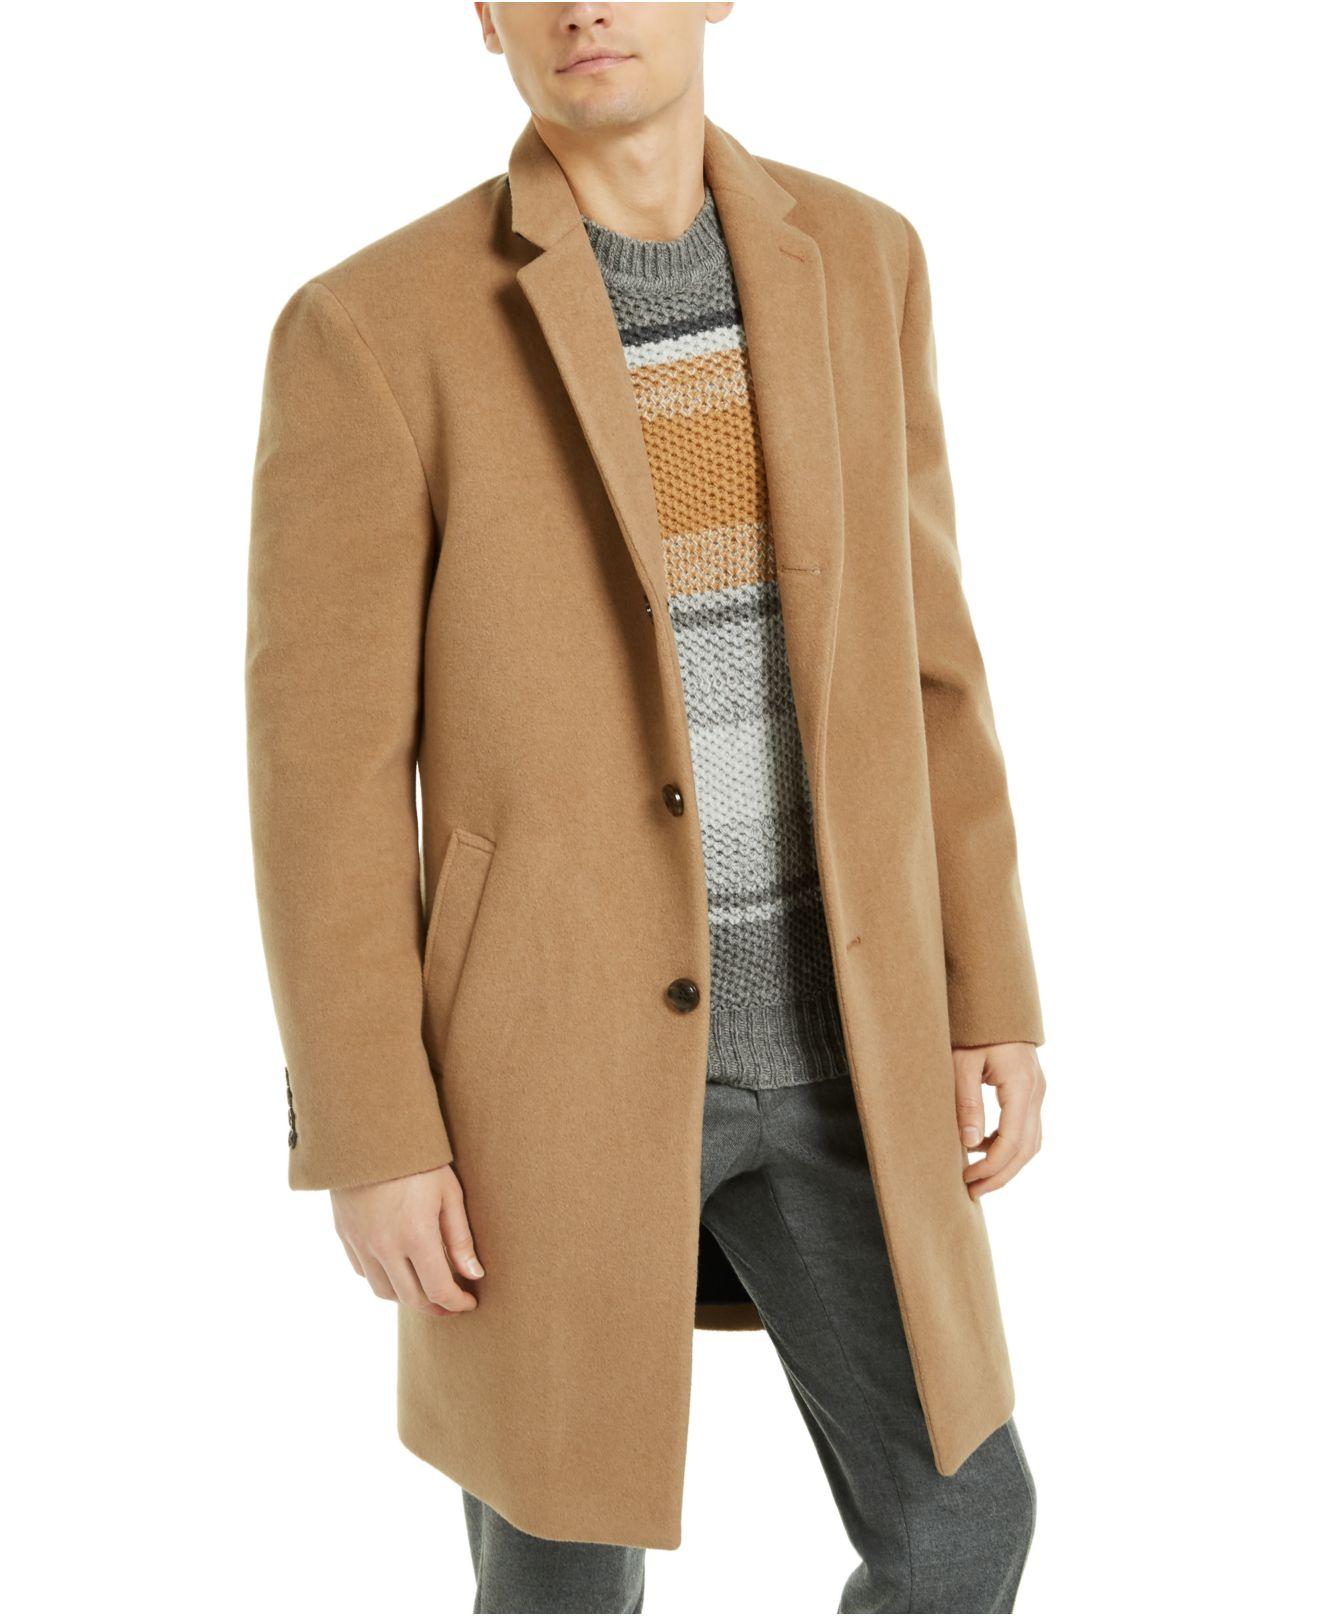 Tommy Hilfiger Coat, Barnes Double-button in Camel (Brown) for Men - Lyst